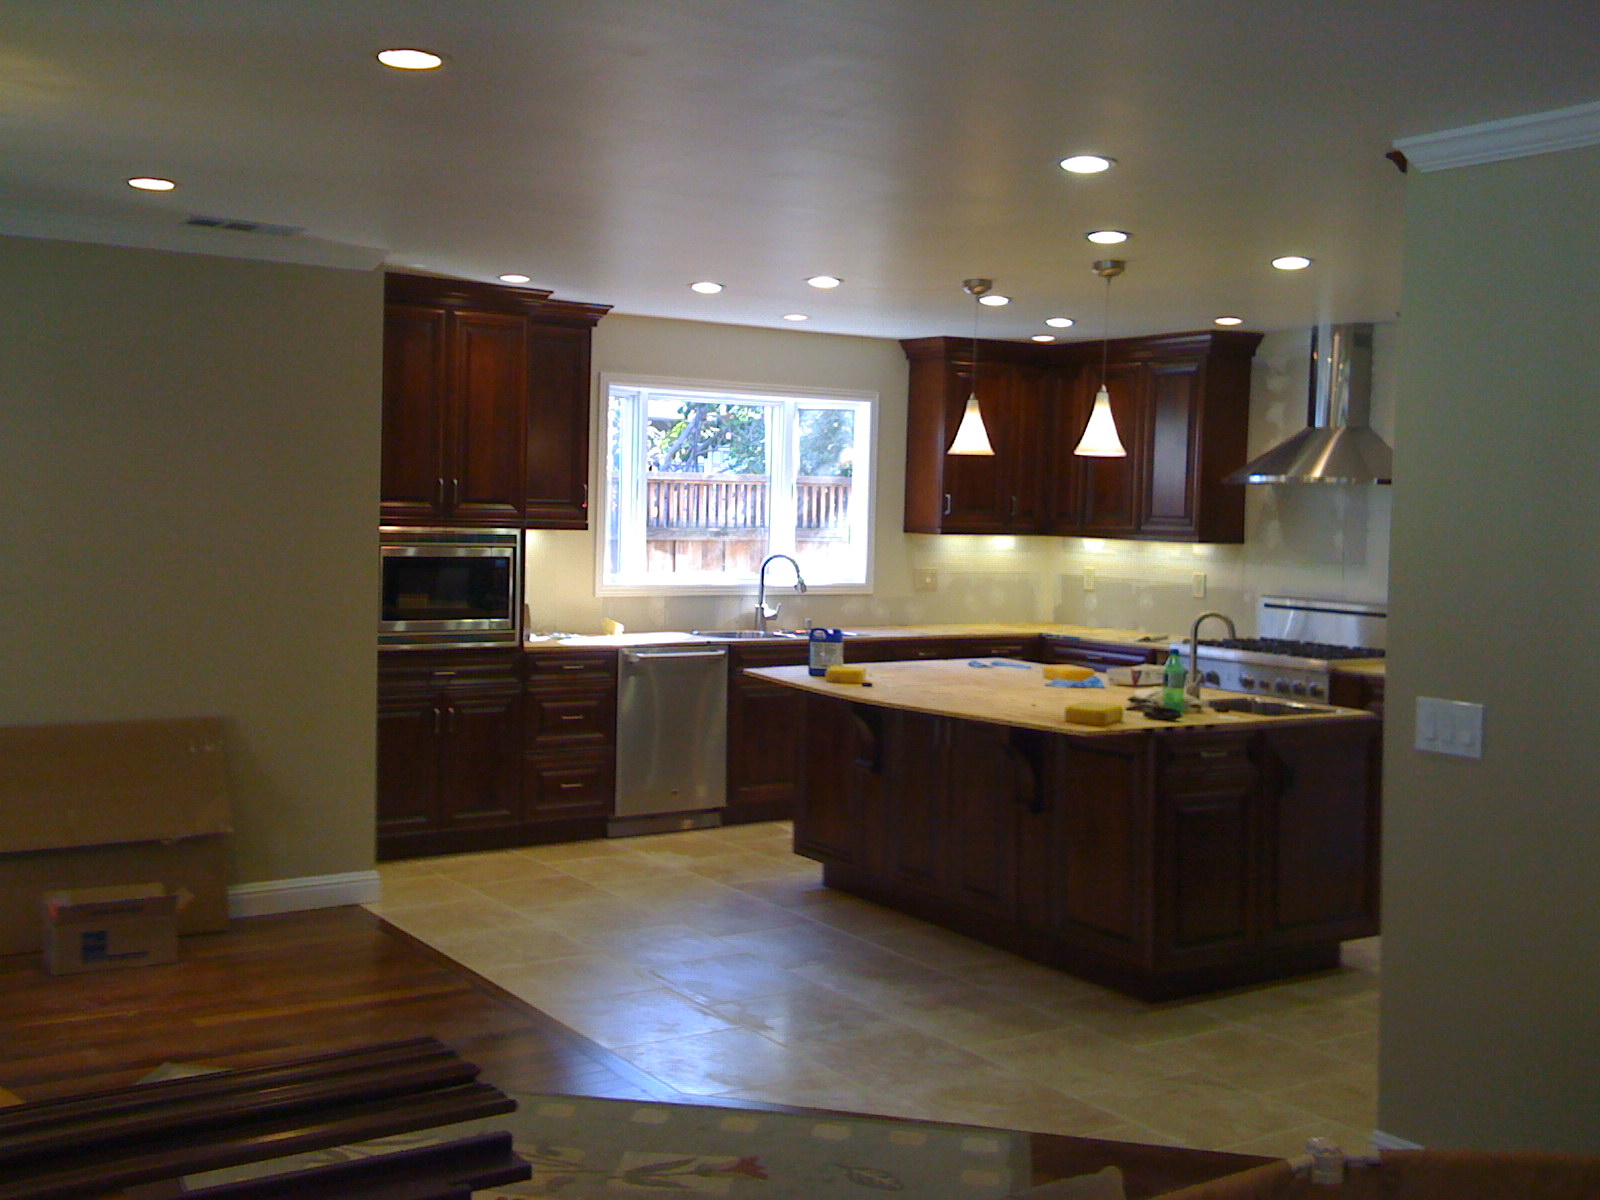 look at the ceiling smooth transition, smooth oak flooring & tile transition